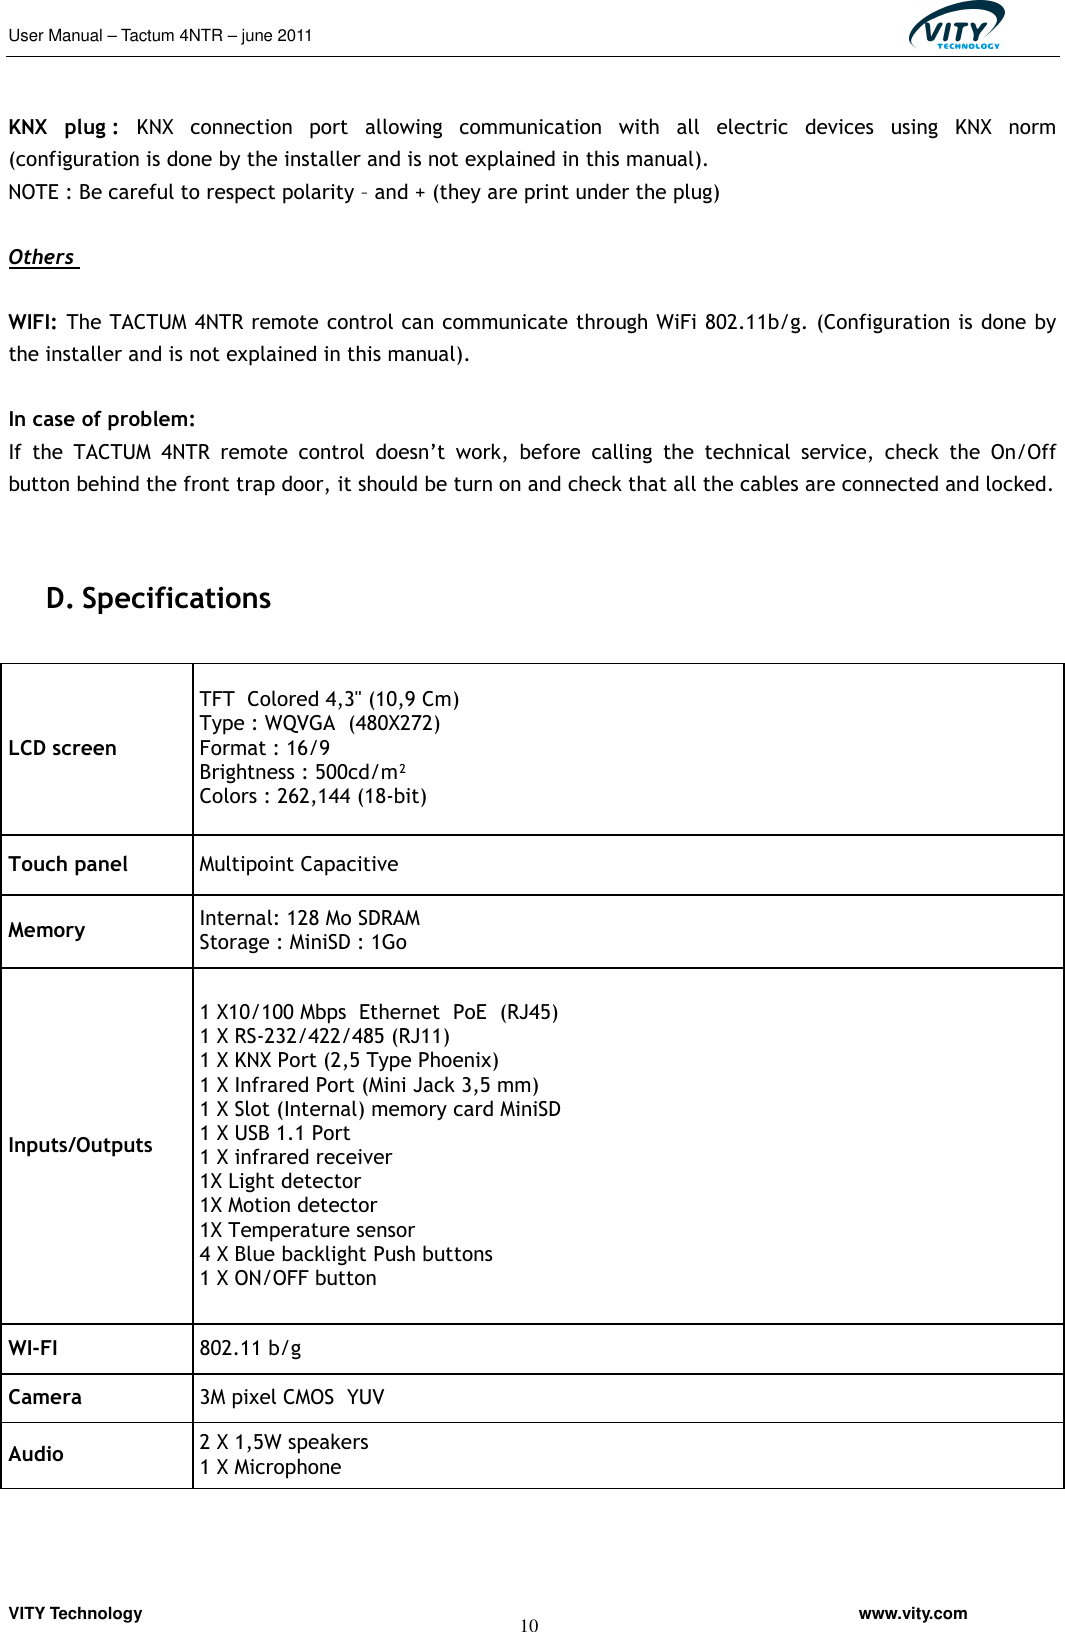 User Manual – Tactum 4NTR – june 2011                                                  VITY Technology                                                         www.vity.com  10                               KNX  plug :  KNX  connection  port  allowing  communication  with  all  electric  devices  using  KNX  norm (configuration is done by the installer and is not explained in this manual).                              NOTE : Be careful to respect polarity – and + (they are print under the plug)   Others   WIFI: The TACTUM 4NTR remote control can communicate through WiFi 802.11b/g. (Configuration is done by the installer and is not explained in this manual).  In case of problem:  If  the  TACTUM  4NTR  remote  control  doesn’t  work,  before  calling  the  technical  service,  check  the  On/Off button behind the front trap door, it should be turn on and check that all the cables are connected and locked.                              D. Specifications   LCD screen TFT  Colored 4,3&apos;&apos; (10,9 Cm)  Type : WQVGA  (480X272)                Format : 16/9  Brightness : 500cd/m²    Colors : 262,144 (18-bit) Touch panel   Multipoint Capacitive  Memory   Internal: 128 Mo SDRAM  Storage : MiniSD : 1Go Inputs/Outputs 1 X10/100 Mbps  Ethernet  PoE  (RJ45) 1 X RS-232/422/485 (RJ11)  1 X KNX Port (2,5 Type Phoenix)  1 X Infrared Port (Mini Jack 3,5 mm)   1 X Slot (Internal) memory card MiniSD  1 X USB 1.1 Port 1 X infrared receiver  1X Light detector  1X Motion detector  1X Temperature sensor  4 X Blue backlight Push buttons  1 X ON/OFF button WI-FI  802.11 b/g  Camera   3M pixel CMOS  YUV Audio  2 X 1,5W speakers 1 X Microphone   